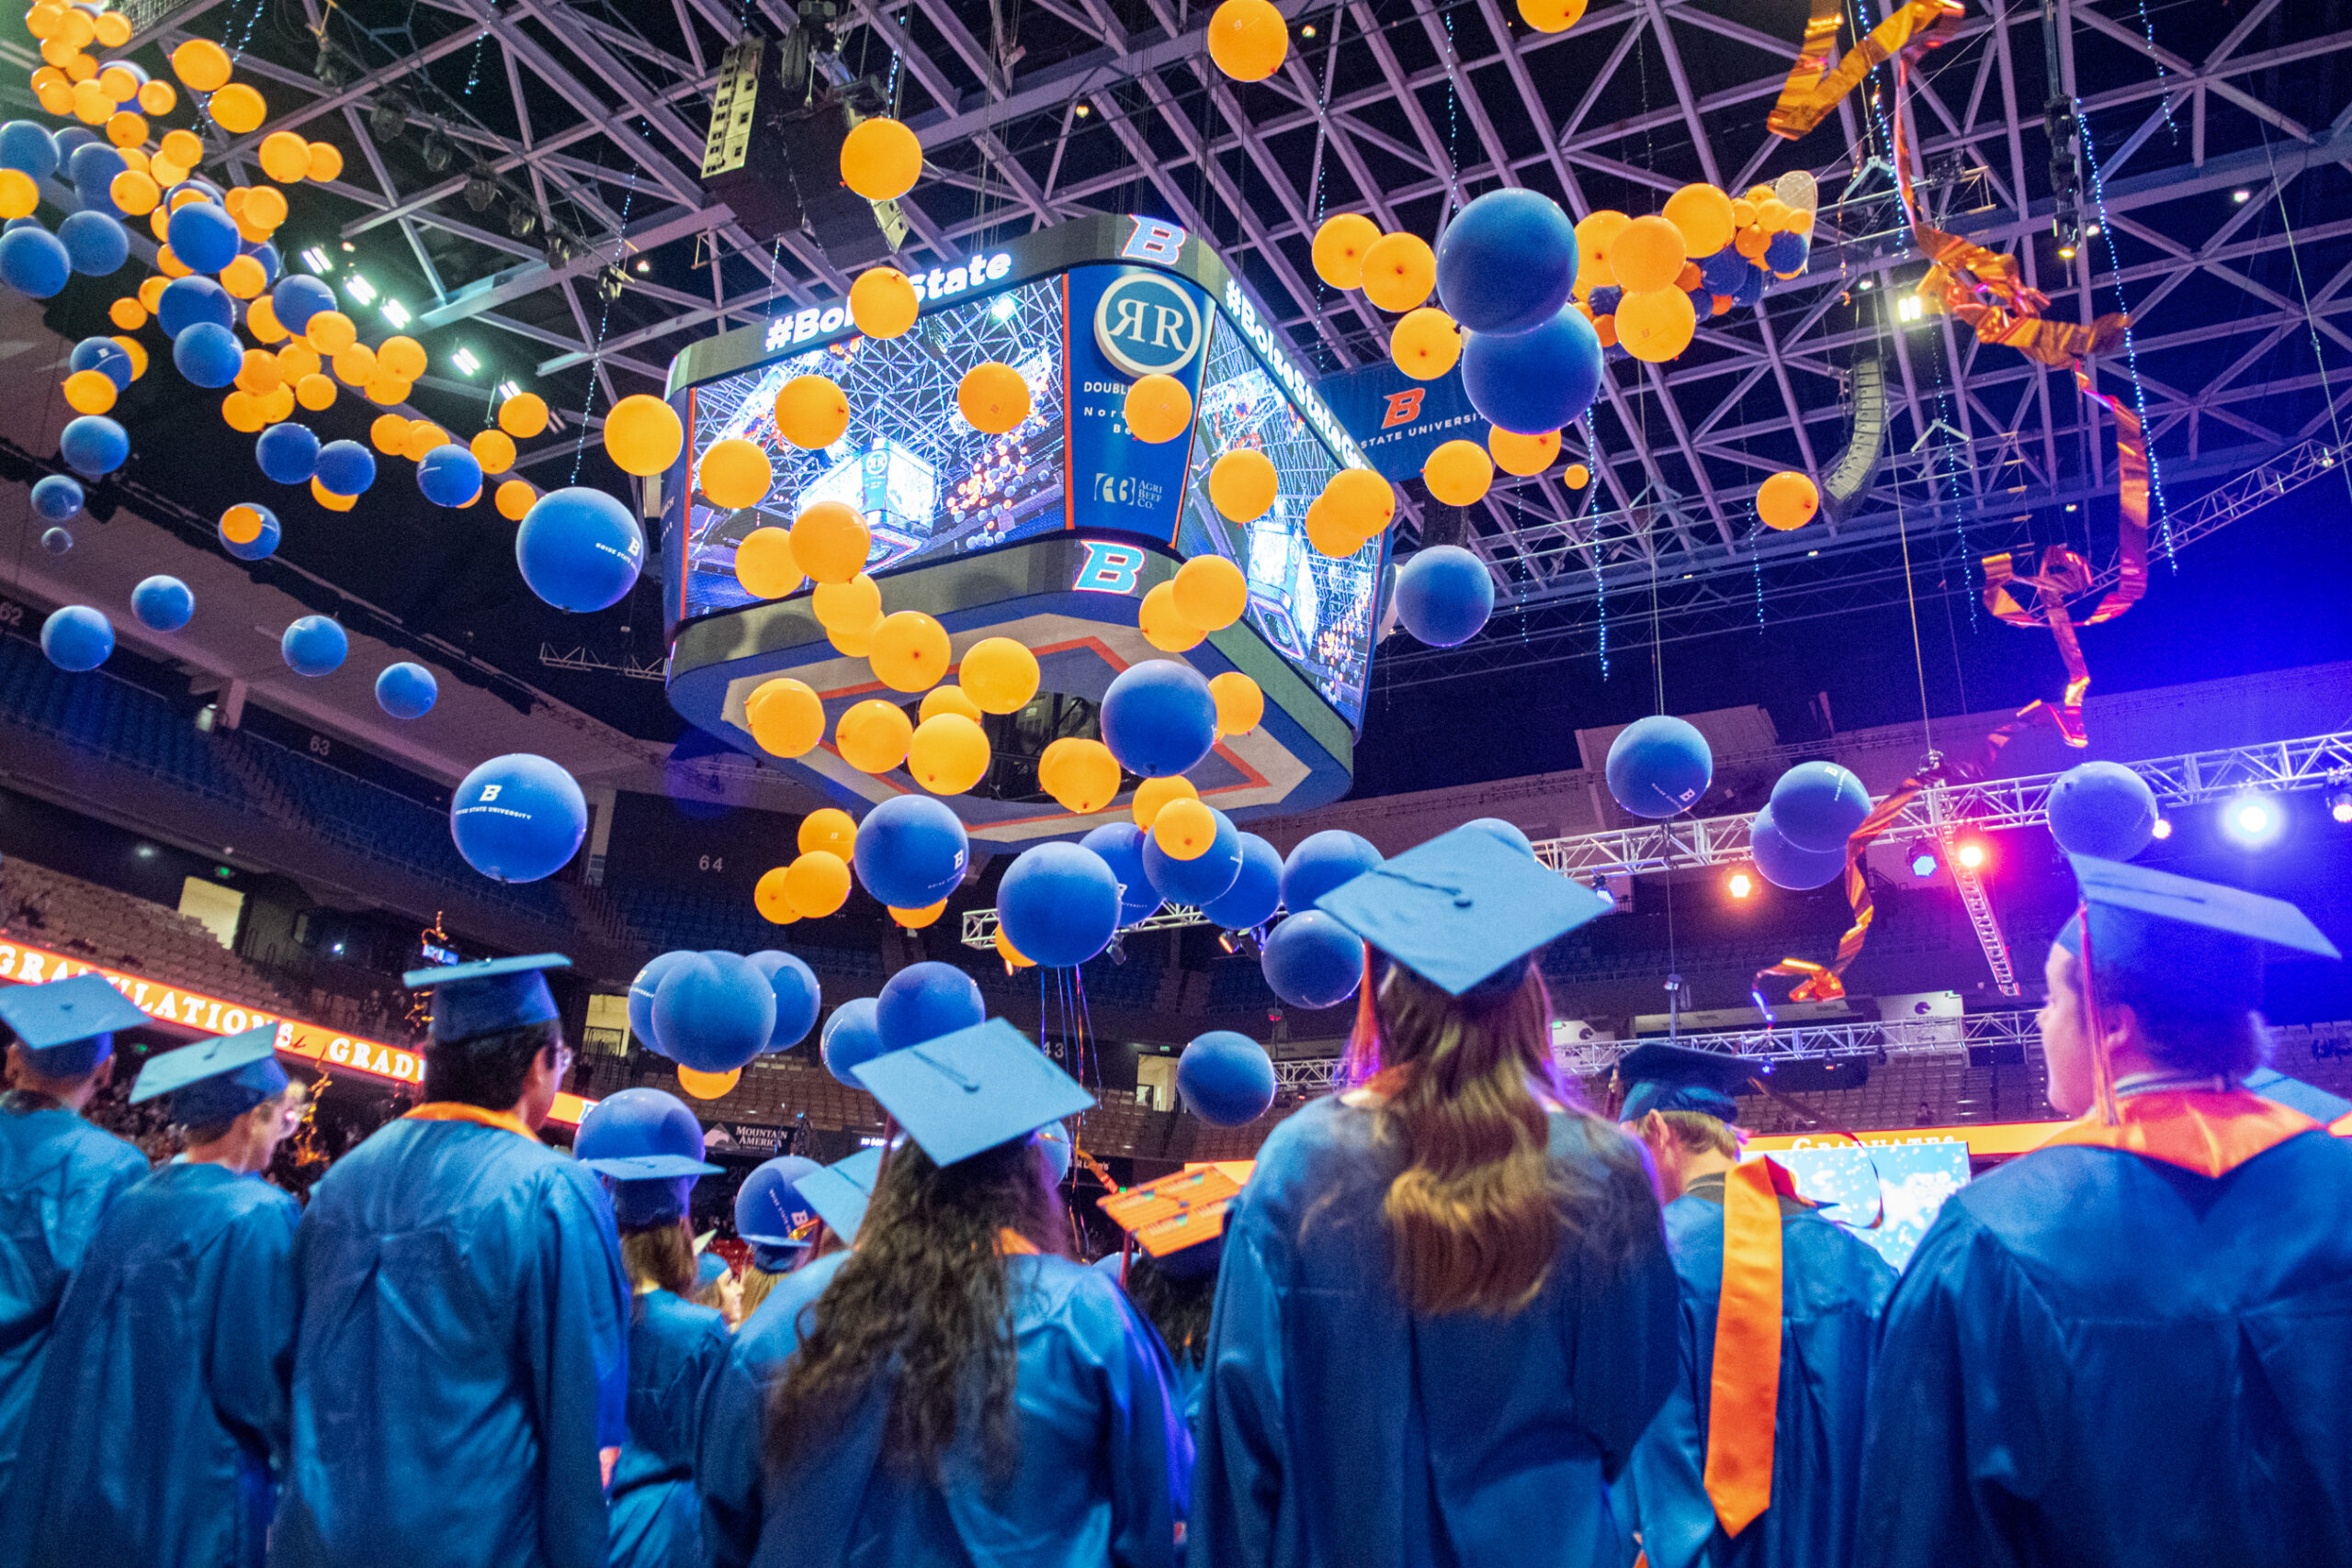 Students at the 2022 Winter Commencement, Boise State University